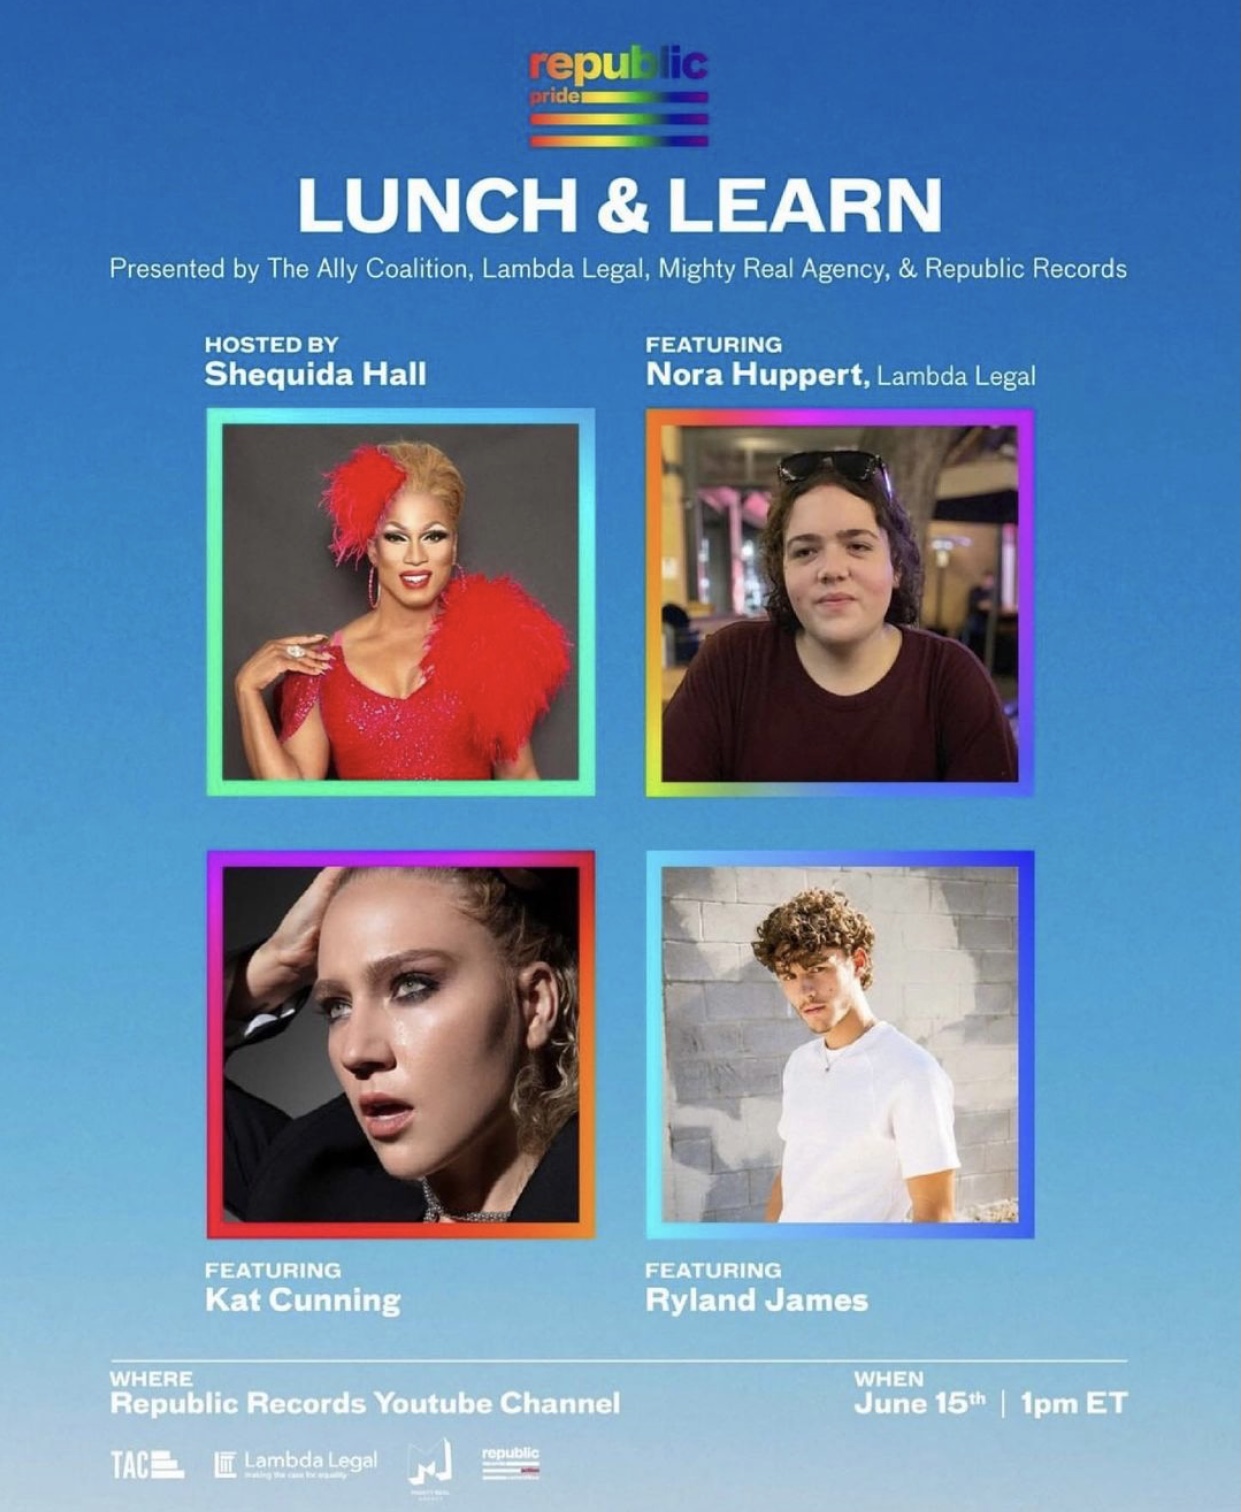 Republic Records Lunch and Learn